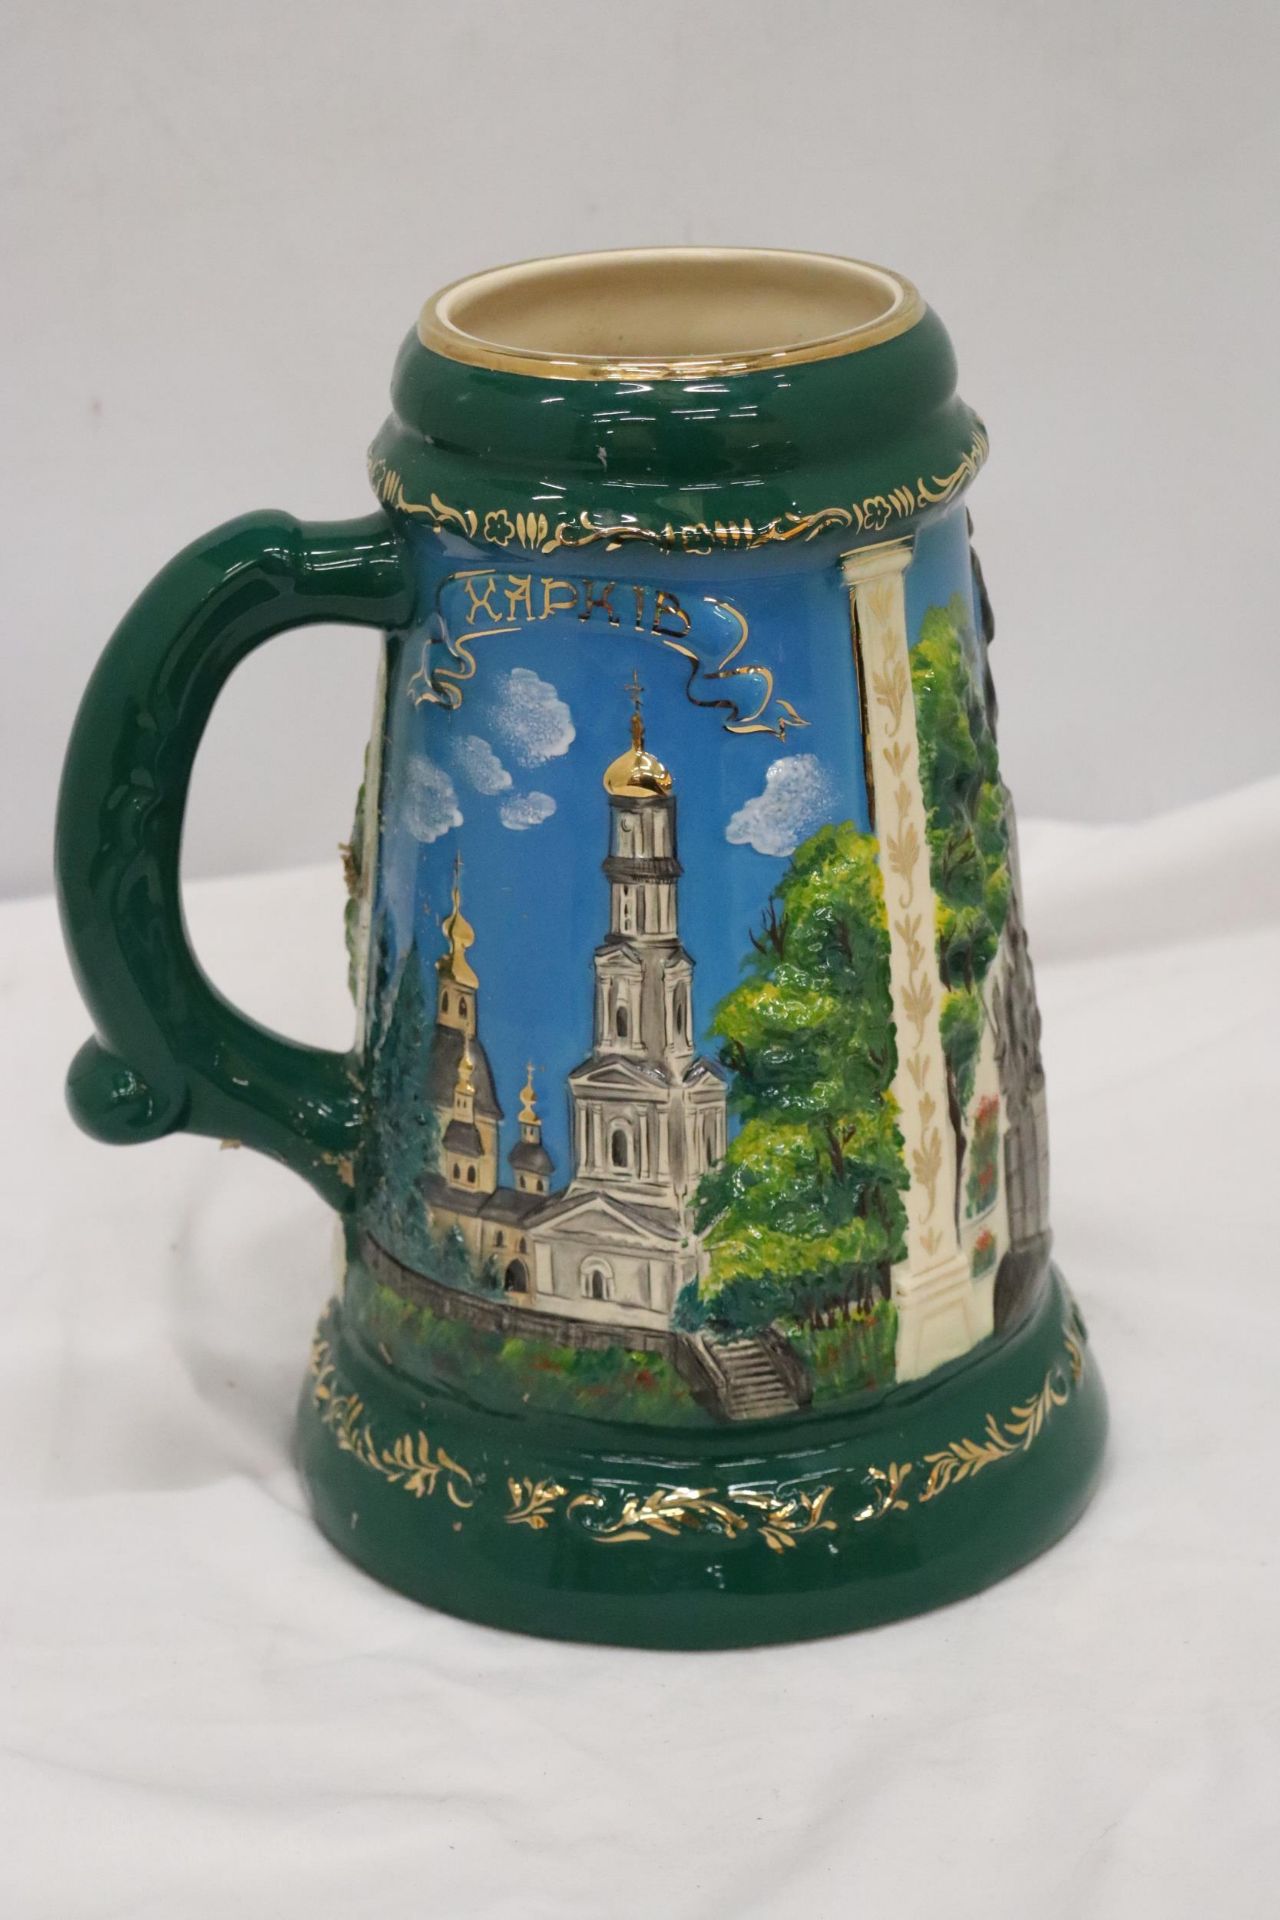 A LARGE TANKARD WITH EMBOSSED DECORATION, MADE IN THE UKRAINE, HEIGHT 28CM - Image 4 of 7